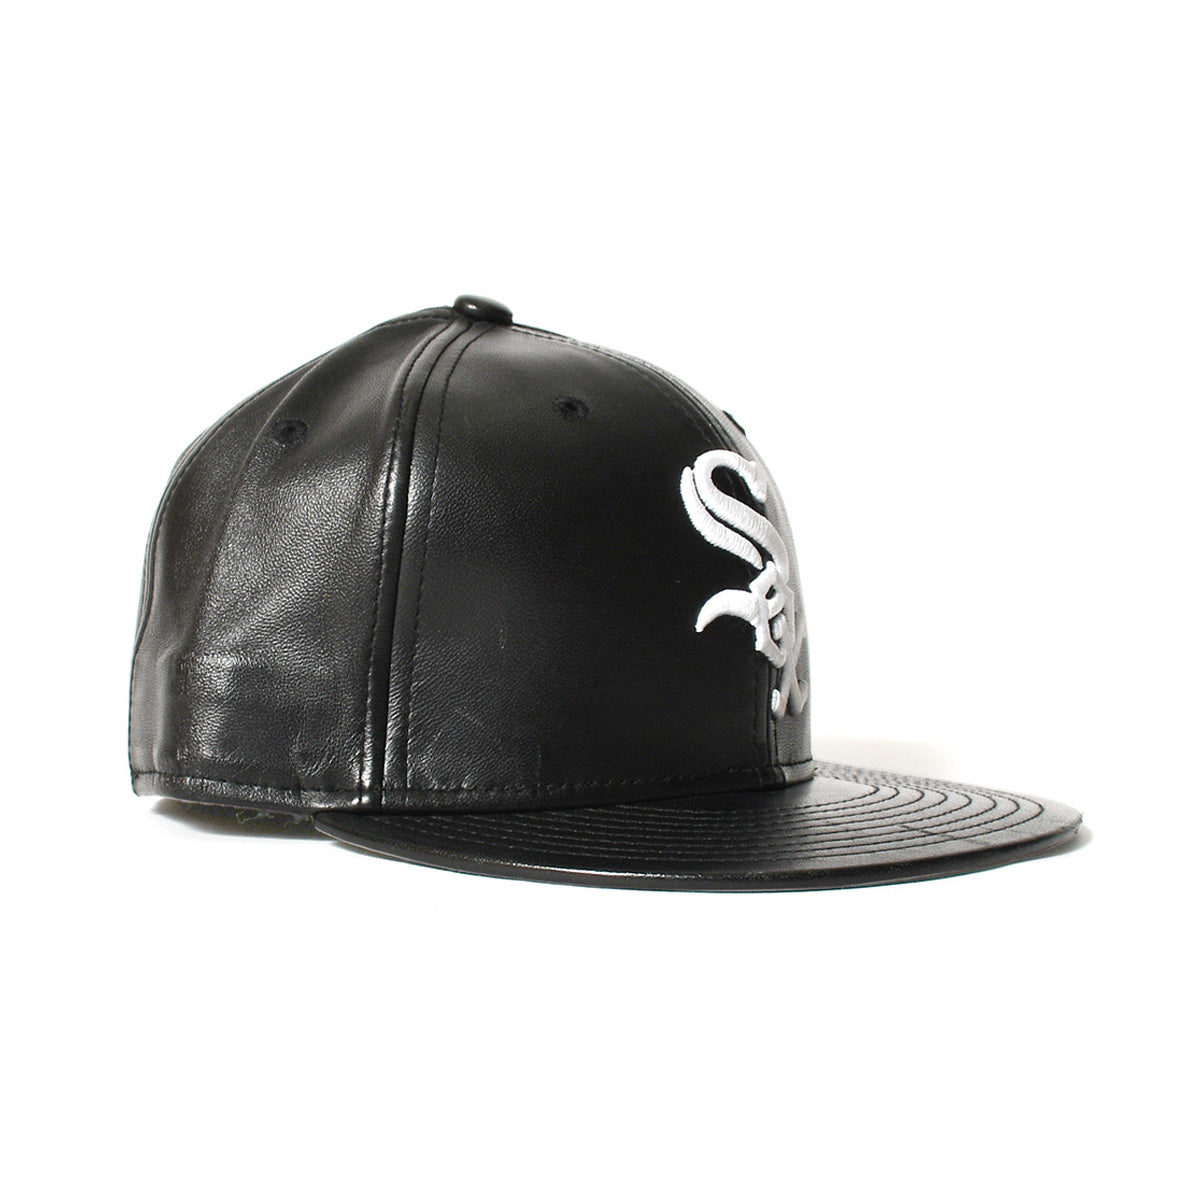 NEW ERA 芝加哥白襪 - 59FIFTY LETHER 黑色